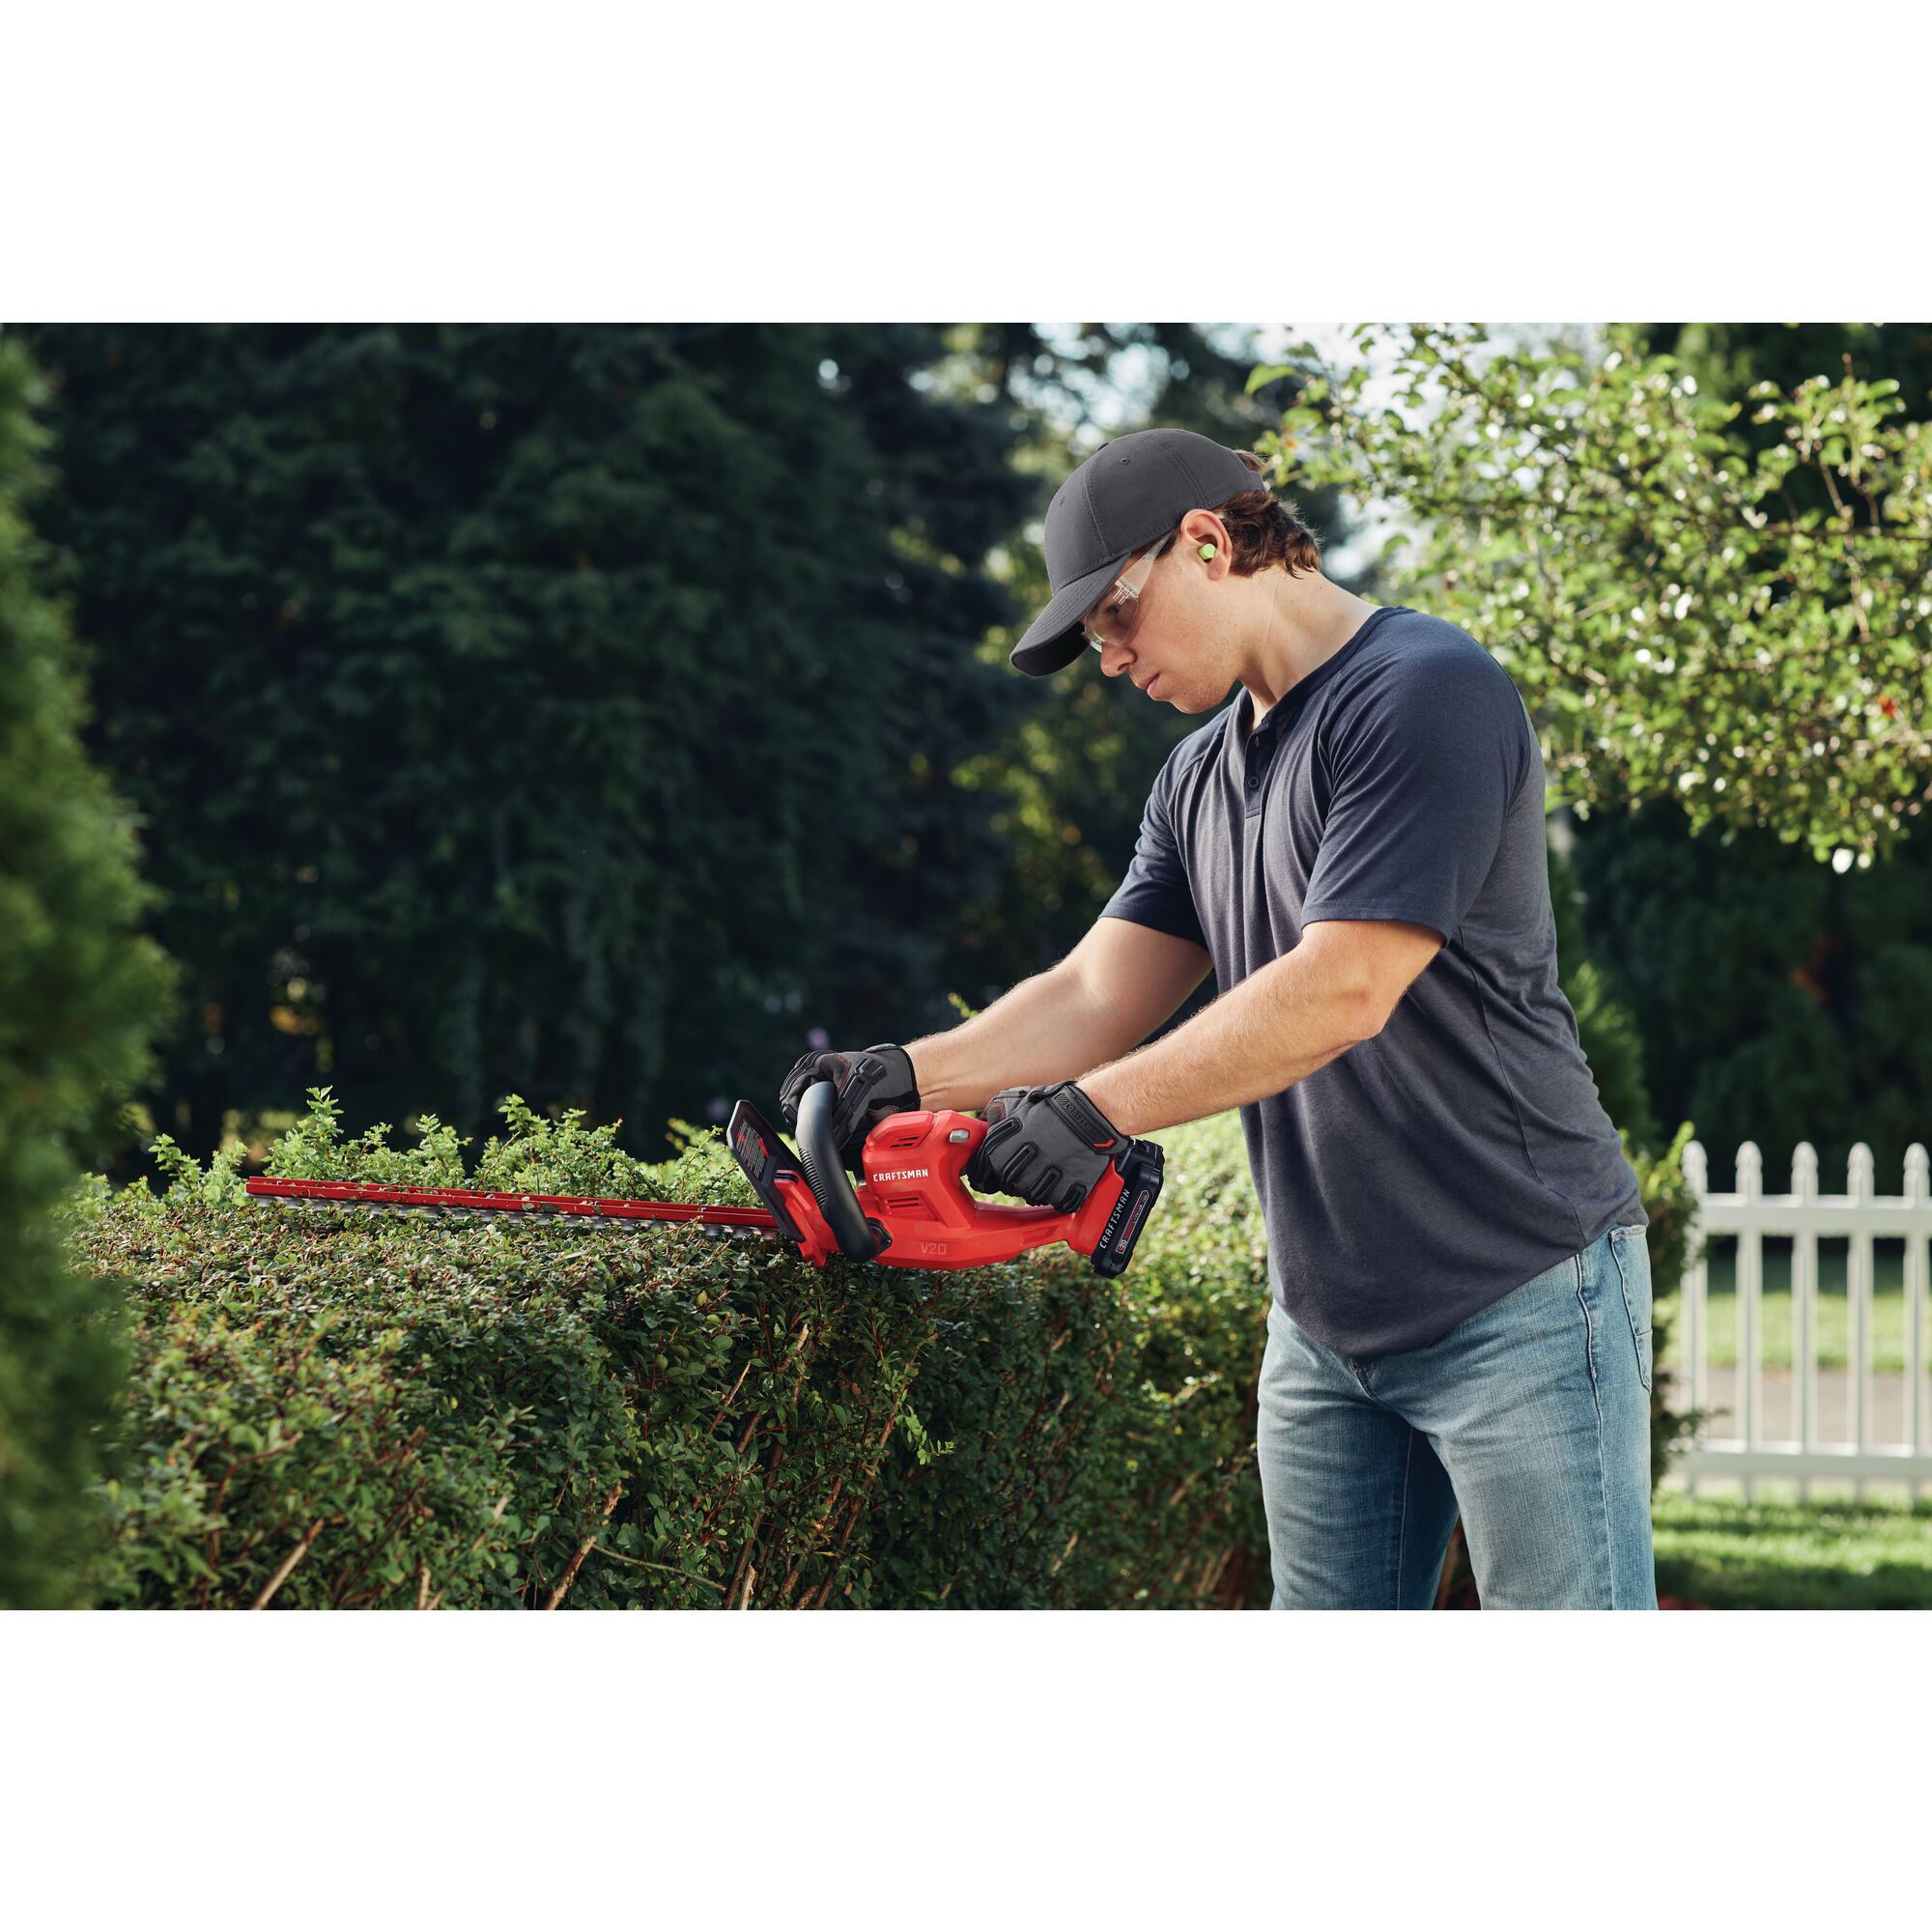 Hyper Tough 20V Max 22-inch Cordless Hedge Trimmer,Dual-action Blade